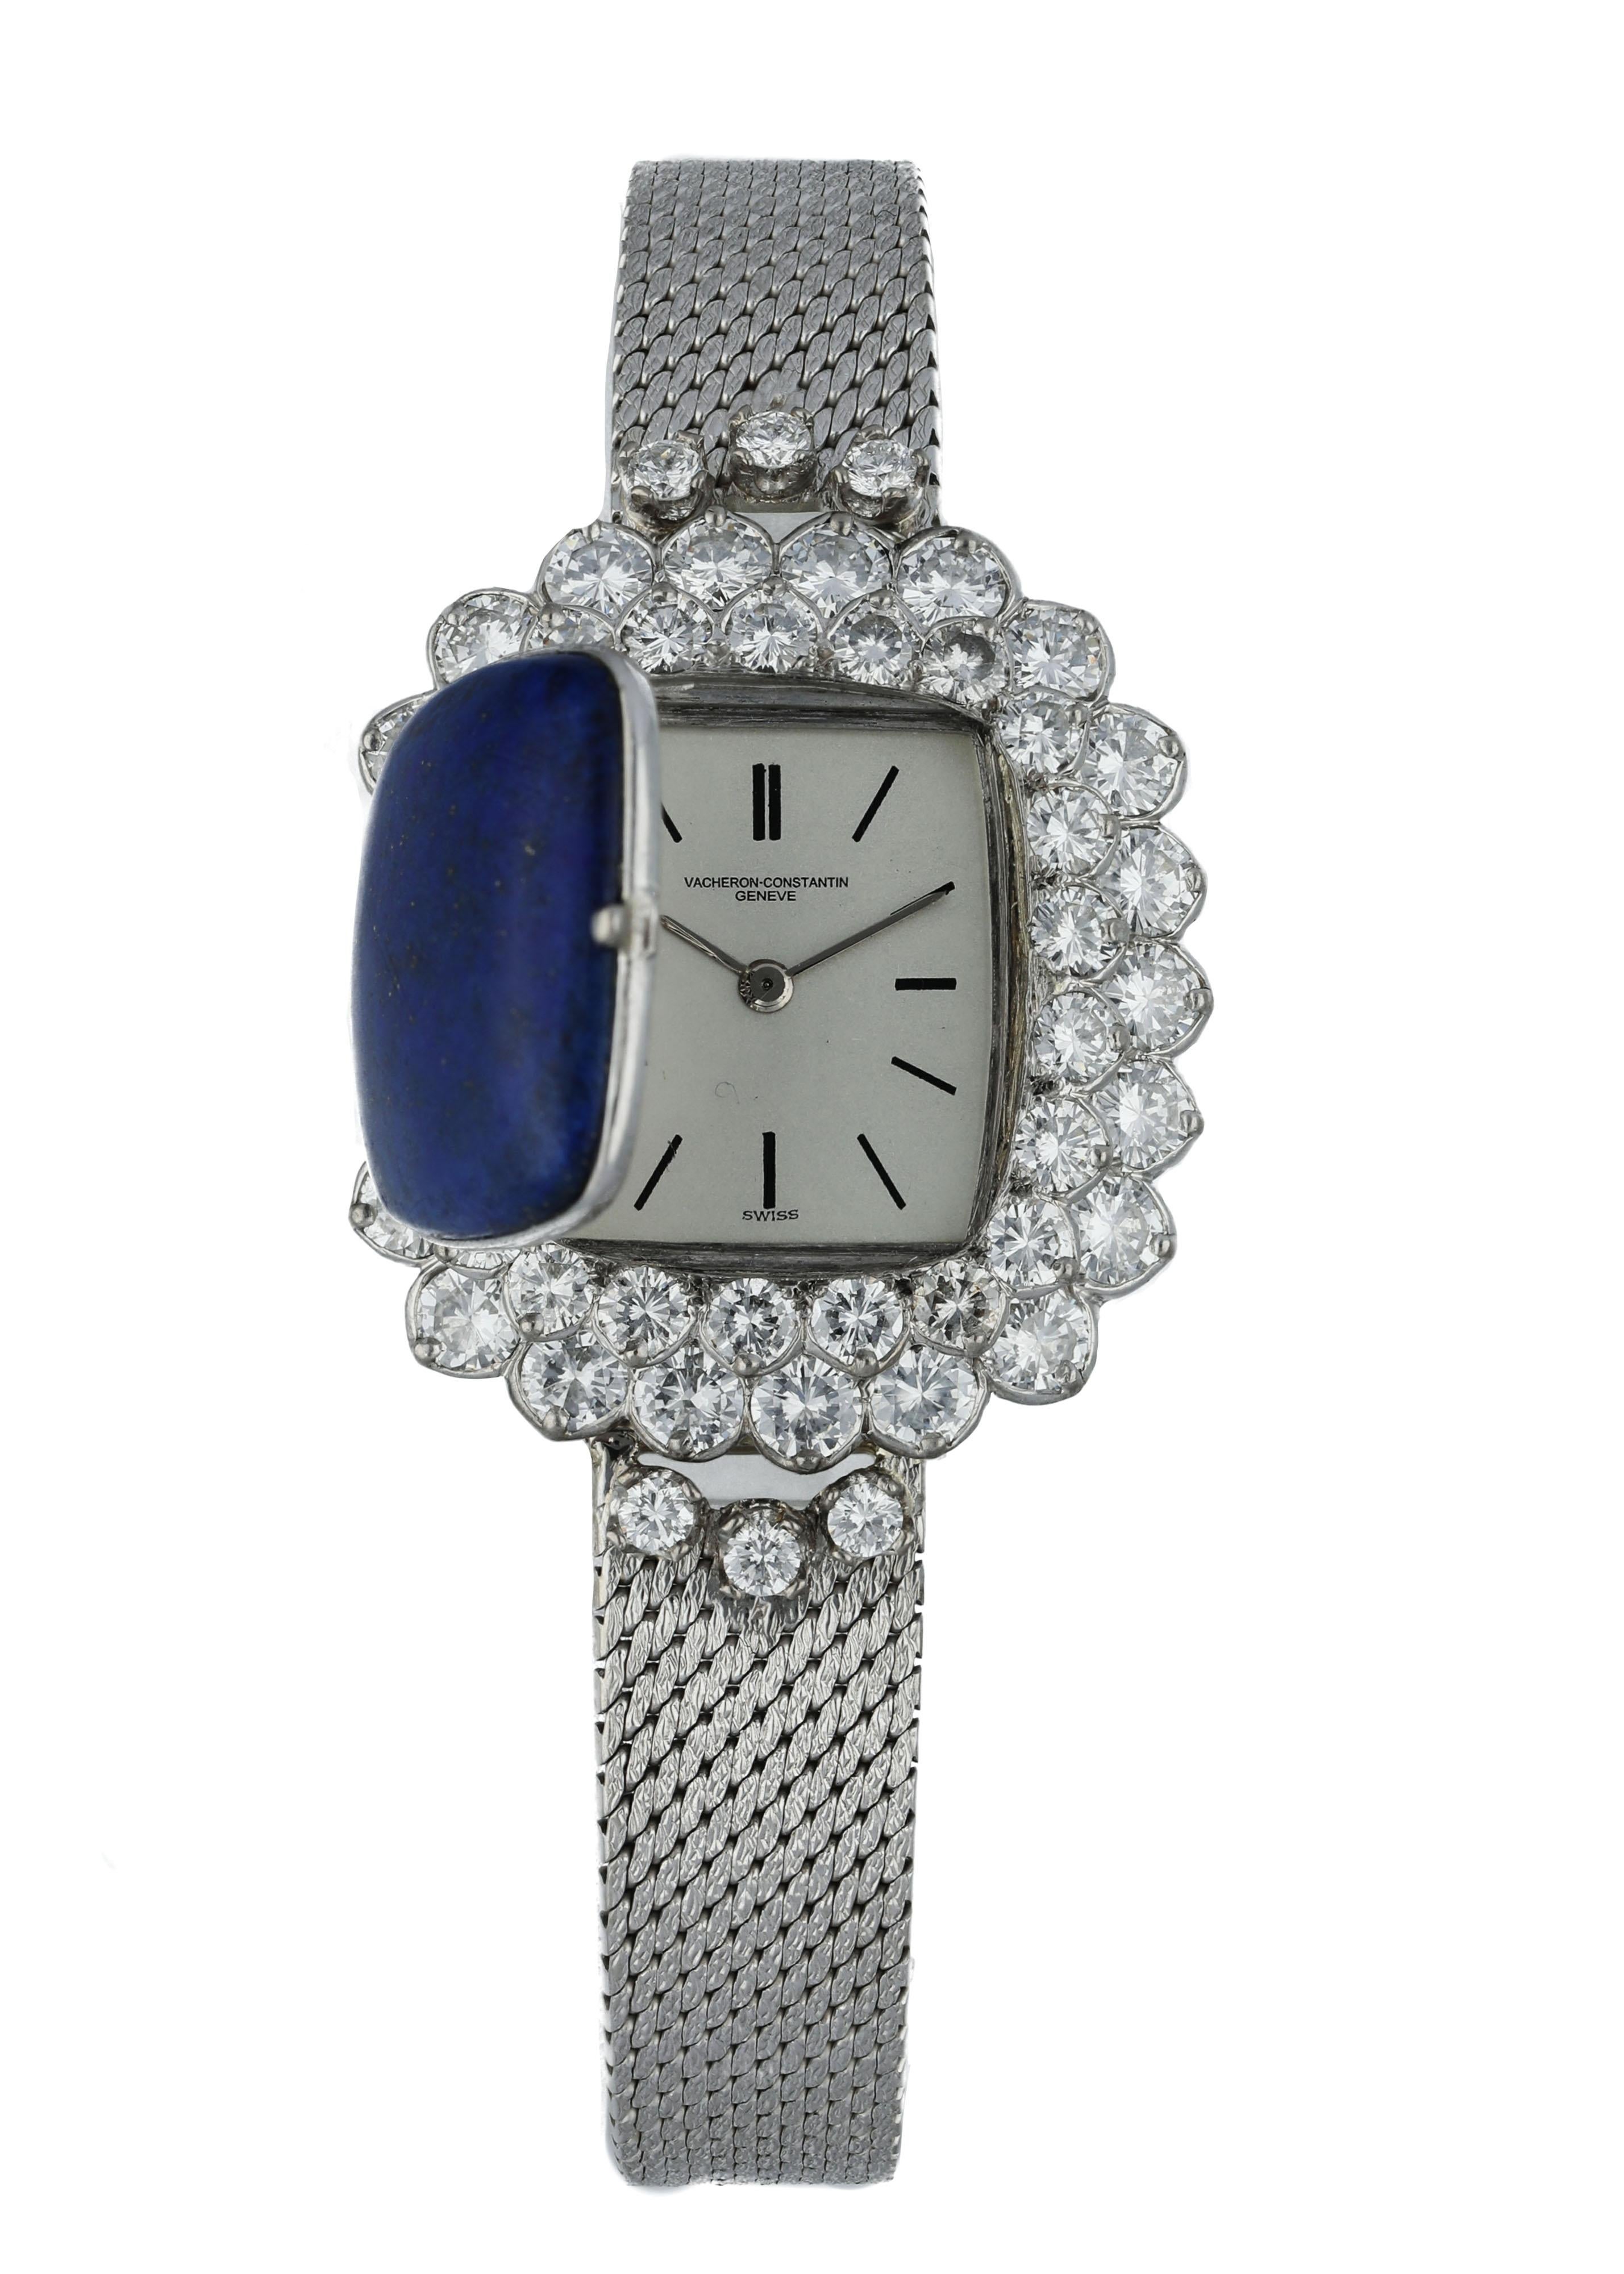 Vacheron Constantin Ladies Watch. 
25mm 18K White Gold case. 
Factory set diamond bezel. 
White dial with Steel hands with index hour markers. 
White Gold Bracelet with Jewelry Clasp. 
Will fit up to a 6.25-inch wrist. 
Sapphire Crystal, white gold